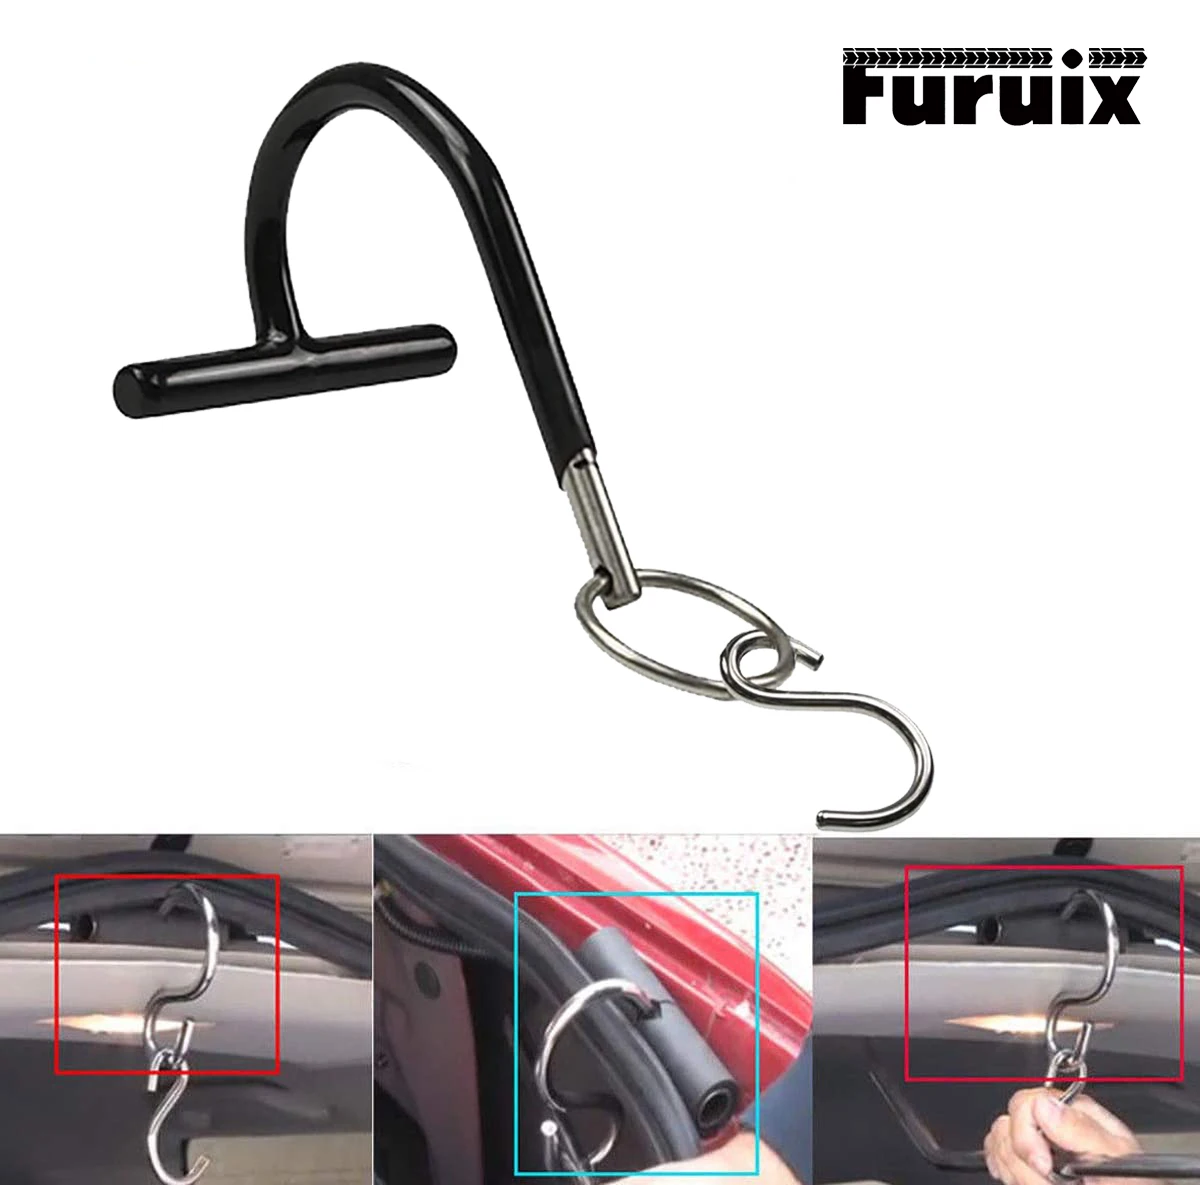 With S-Hook T-Lever Holder Tool Paintless Dent Repair Tools Paintless Dent Removal Tools Hail Rod panitless dent repair tools high quality strap tools for hook with s hook tools